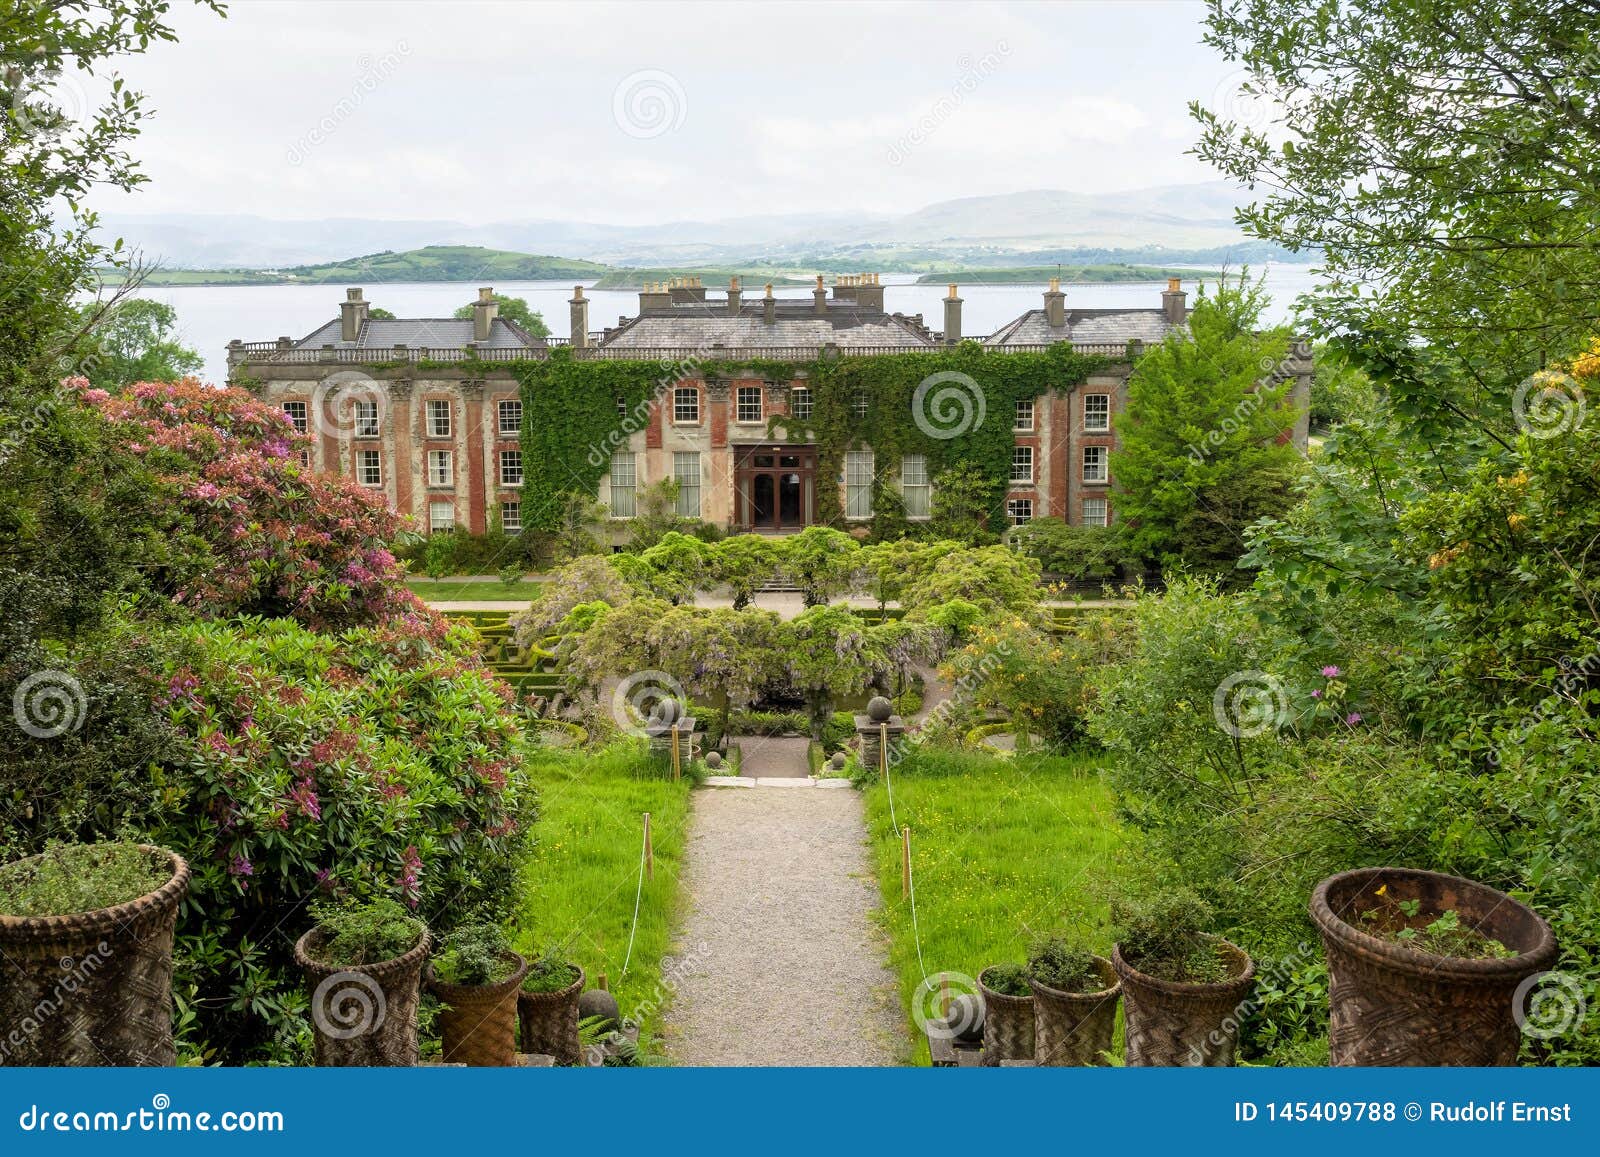 Bed and Breakfast Niblick, Bantry, Ireland - confx.co.uk